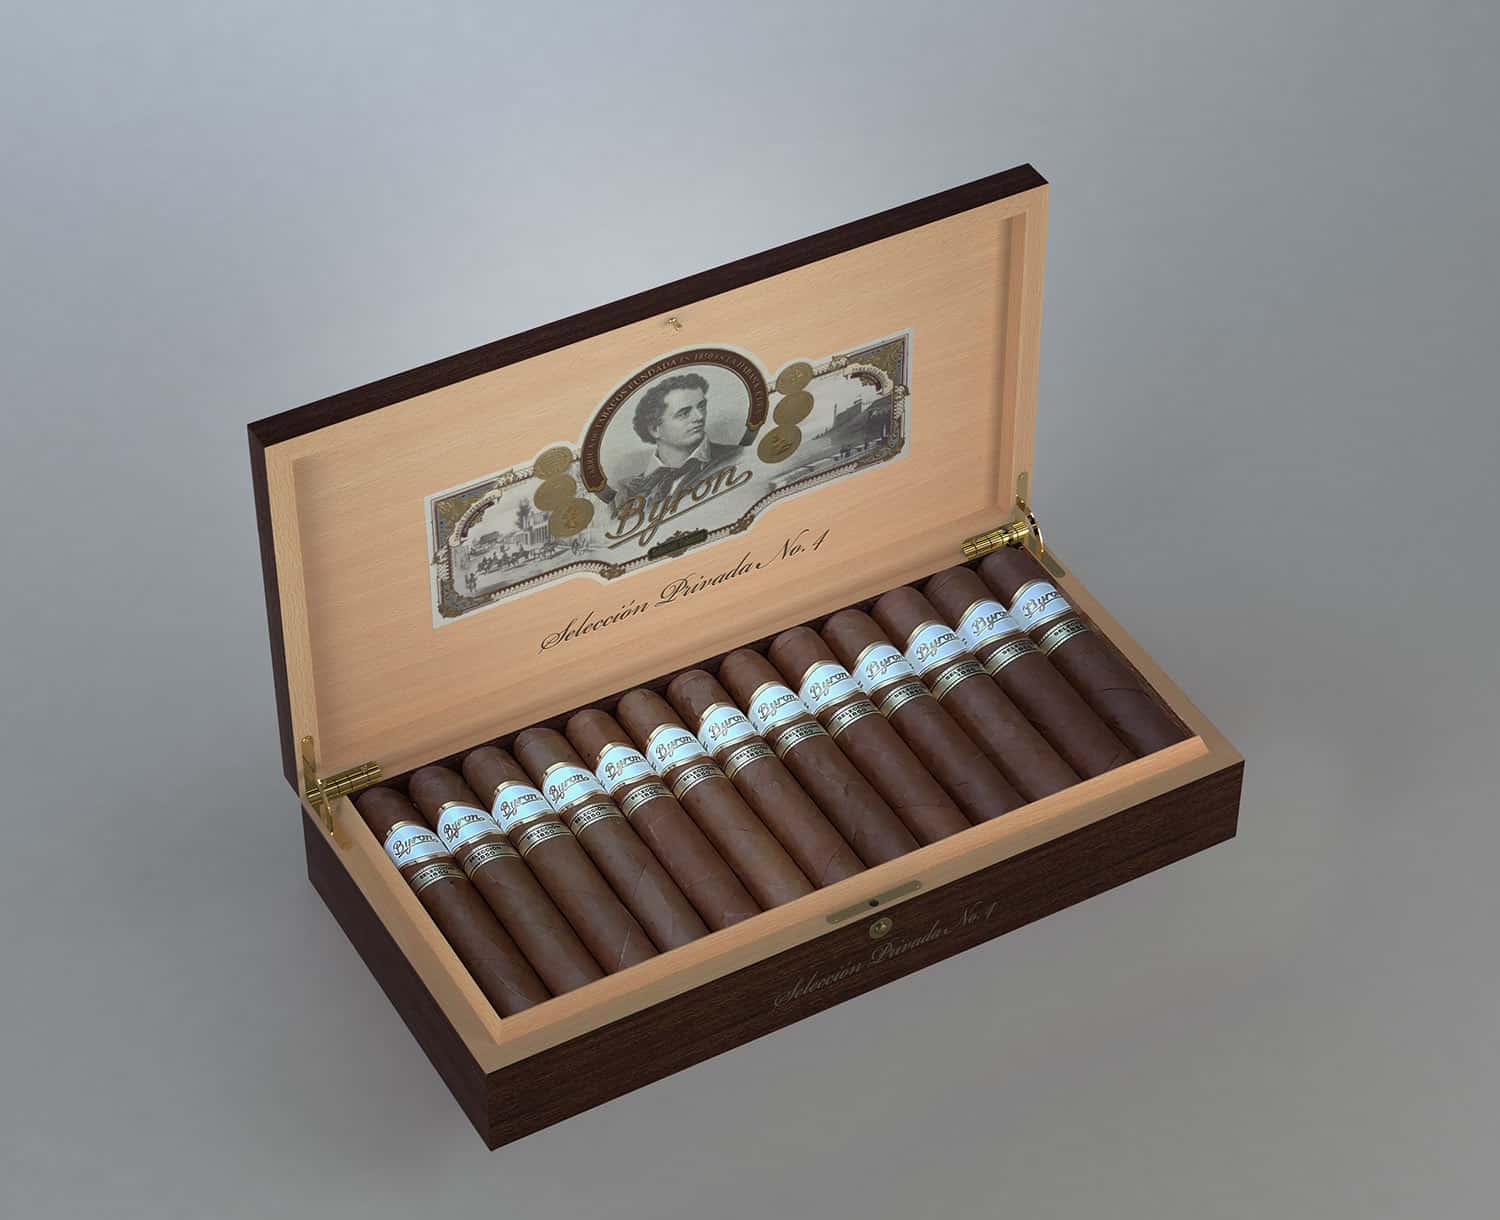 Selected Tobacco Launches Byron 1850 - Cigar News